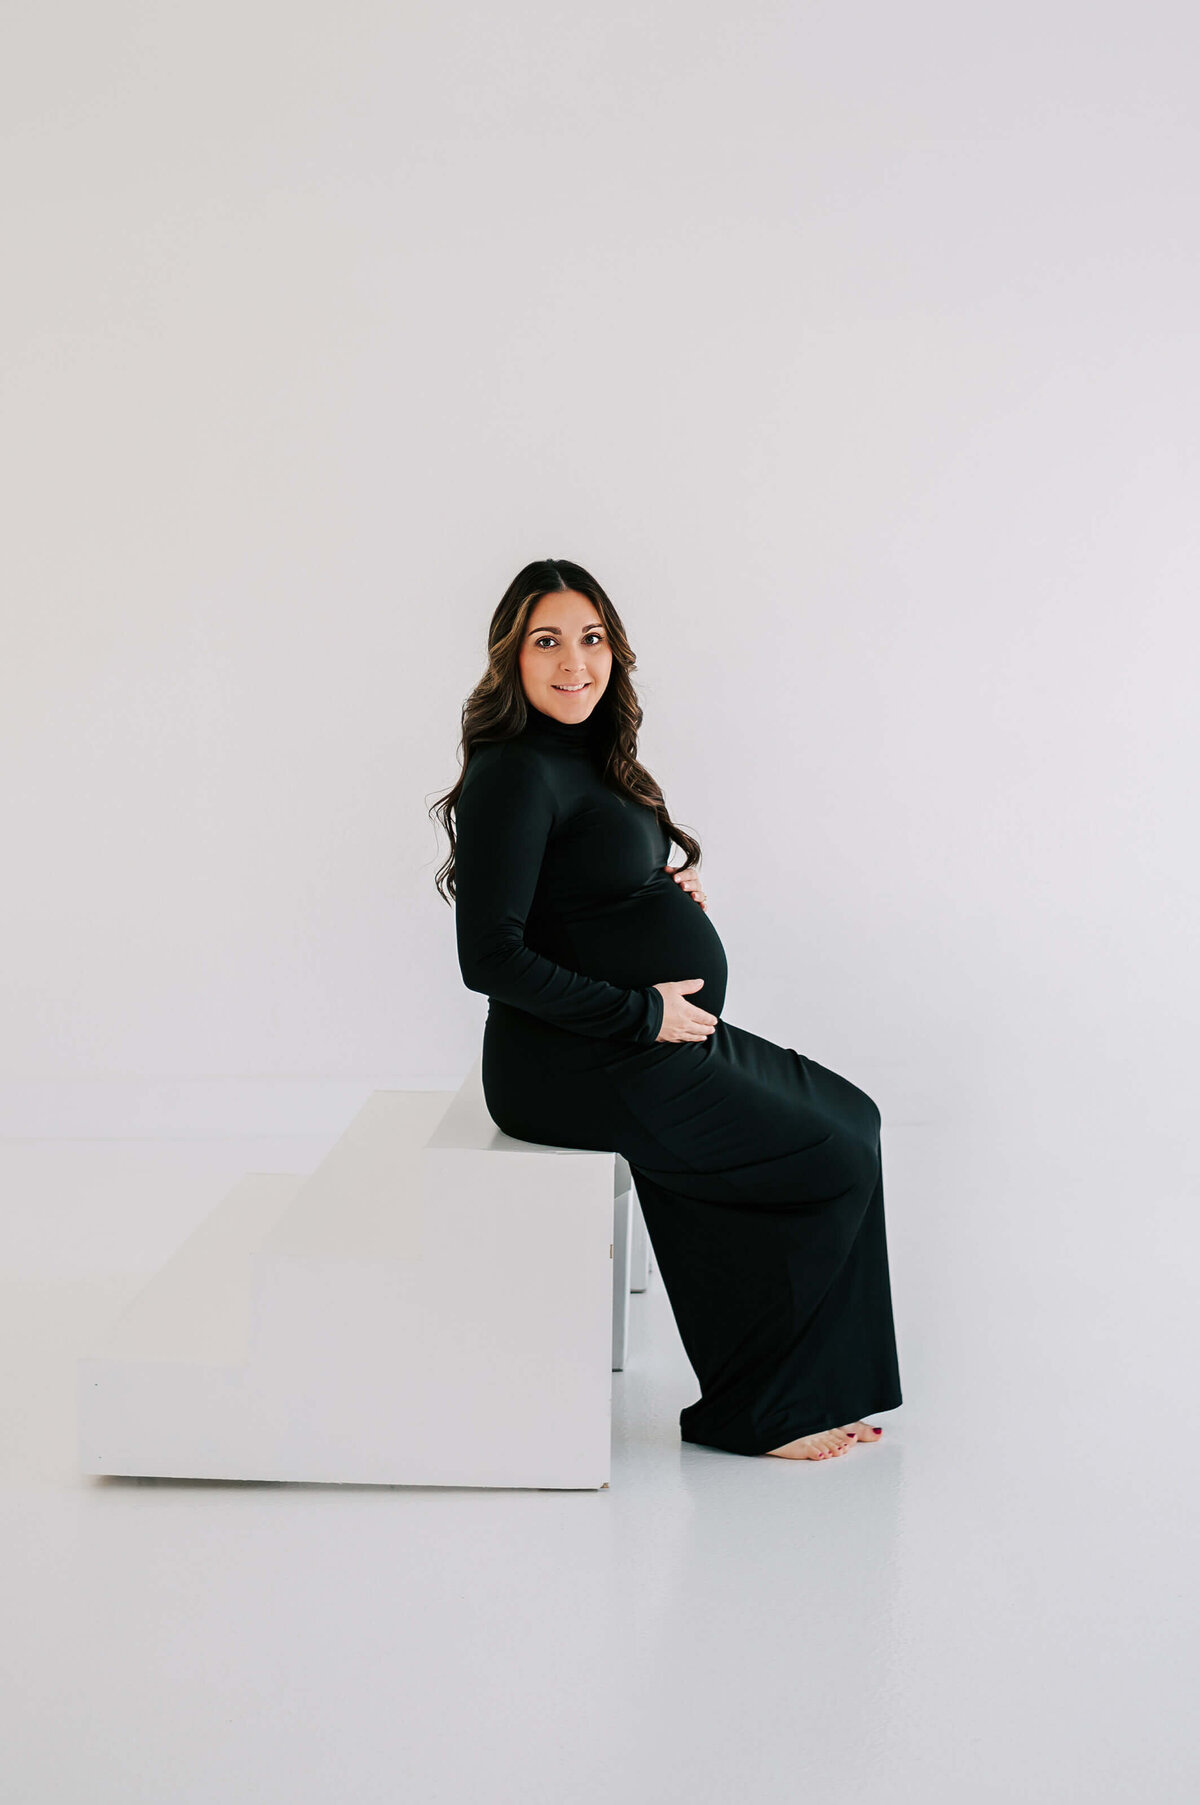 Branson Misosouri maternity photographer Jessica Kennedy of The XO Photography captures pregnant mom in black dress sitting on steps